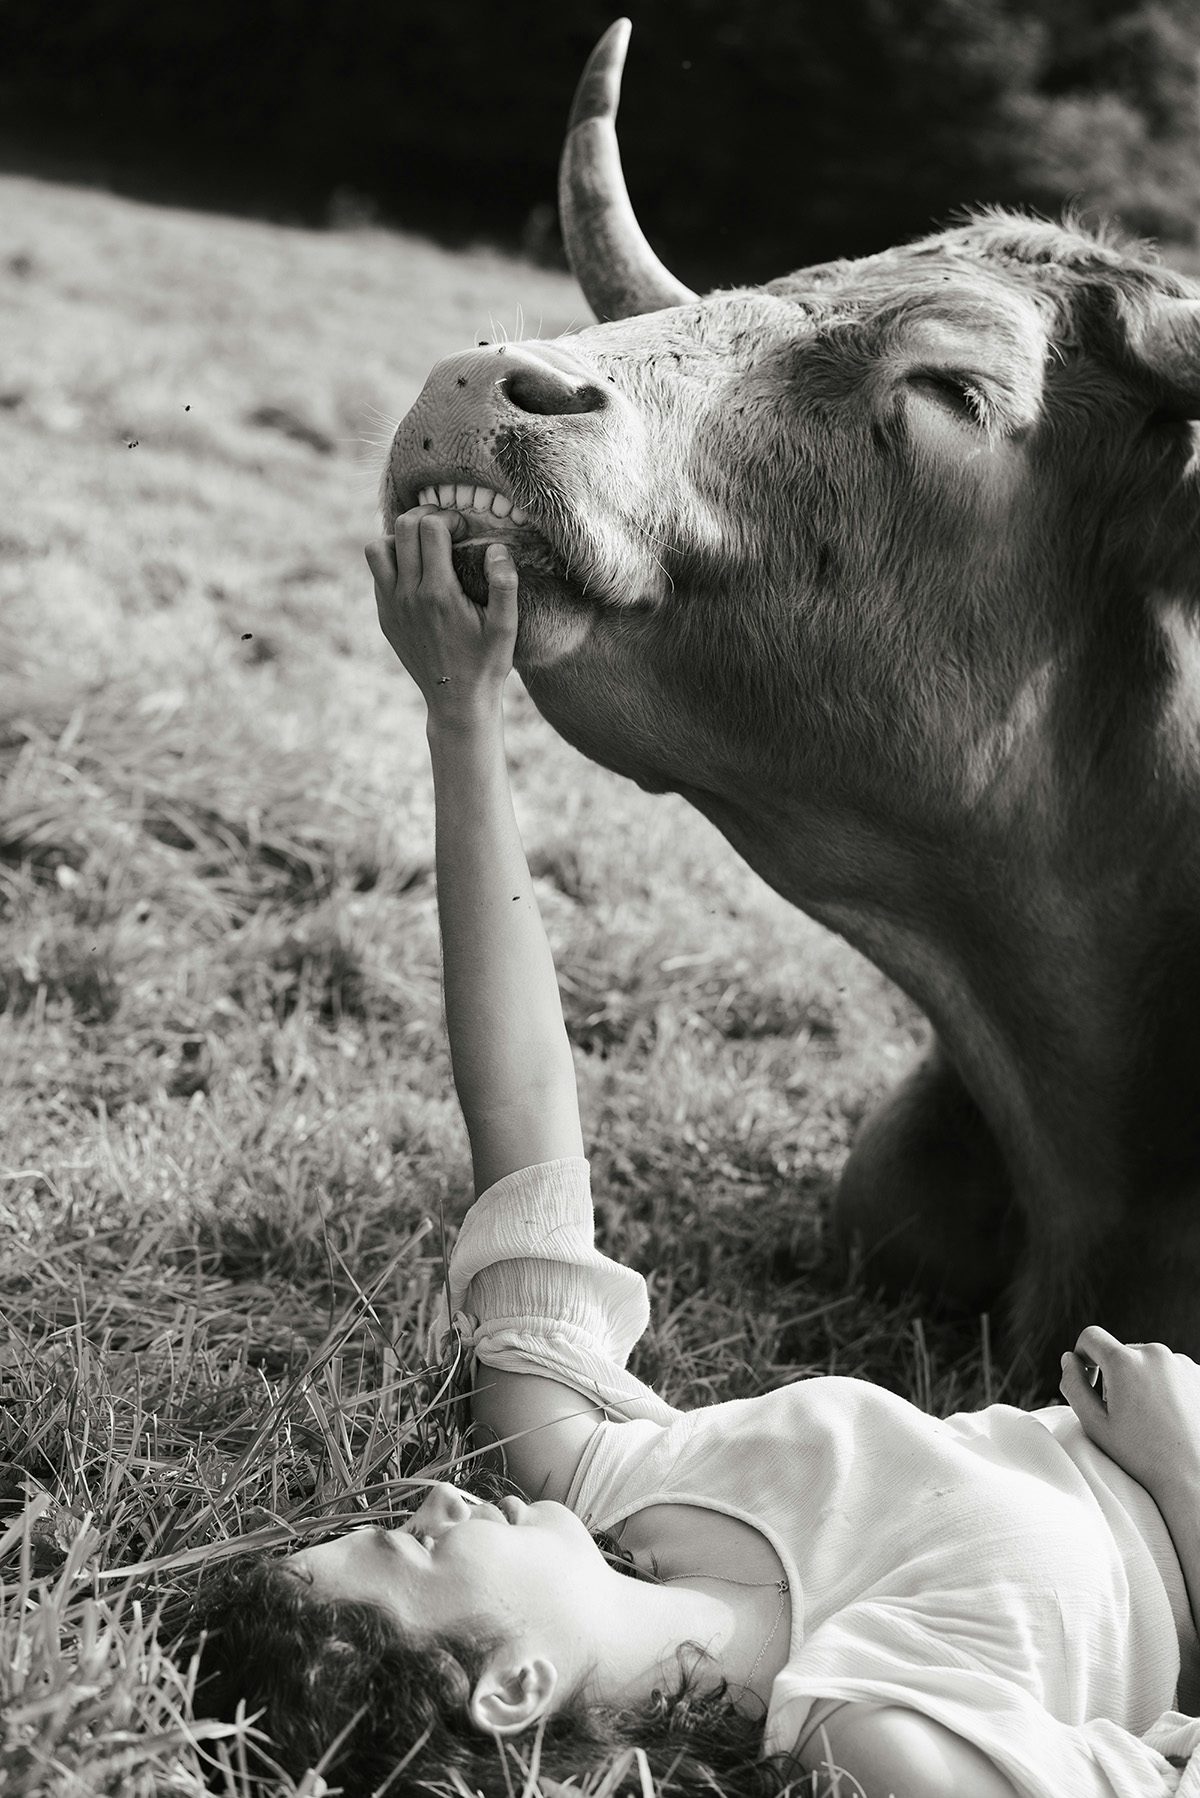 Black and white image shows a young person lying on grass holding onto a cow's bottom lip, taken from Yana Wernicke's book Companions